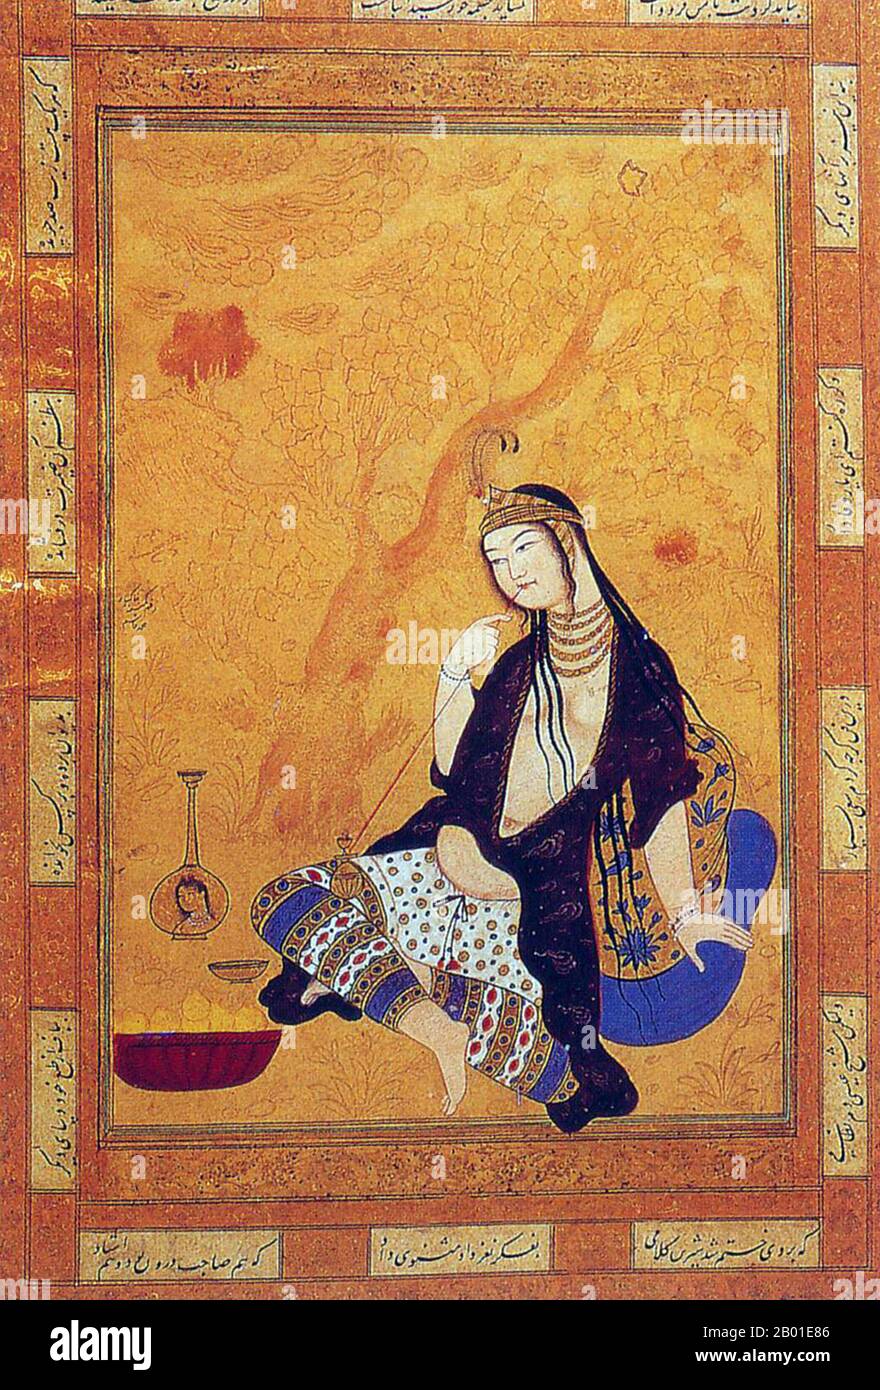 Iran/Persia: Portrait of a girl smoking, Muhammad Qasim Musavvir (c. 1575-1659), Isfahan, 17th century.  Muhammad Qasim Musavvir, one of the famous artists of the Isfahan School, was born in Tabriz. Although his style is quite individual, it has something of the manner of Riza Abbasi, head of the painters' workshop of Shah Abbas I between 1603 and 1605.  Muhammad Qasim was responsible for a number of paintings for albums, portraits of dervishes, young women, cup bearers and princes. He also illustrated a copy of Firdawsi's Book of Kings dated 1648, now at Windsor Castle. Stock Photo